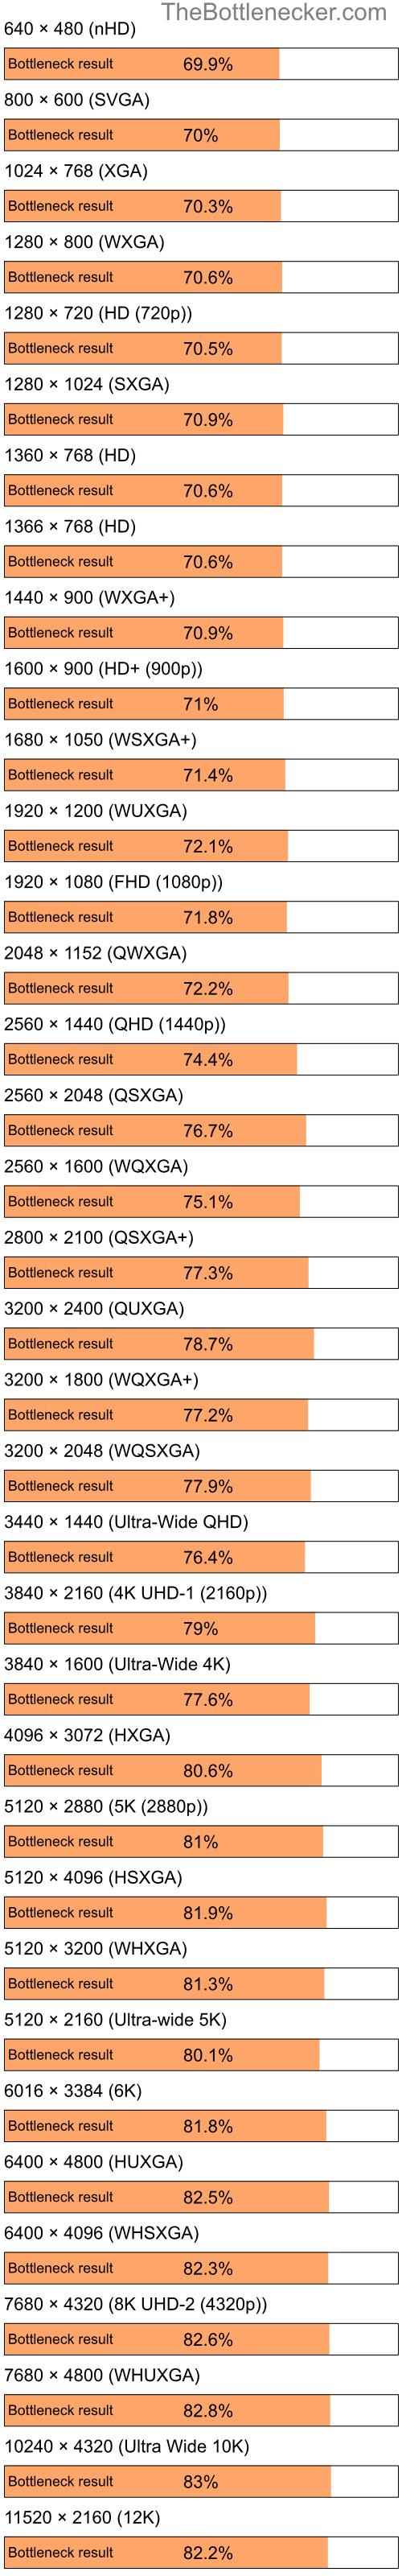 Bottleneck results by resolution for Intel Atom N270 and AMD Radeon X800 PRO in7 Days to Die